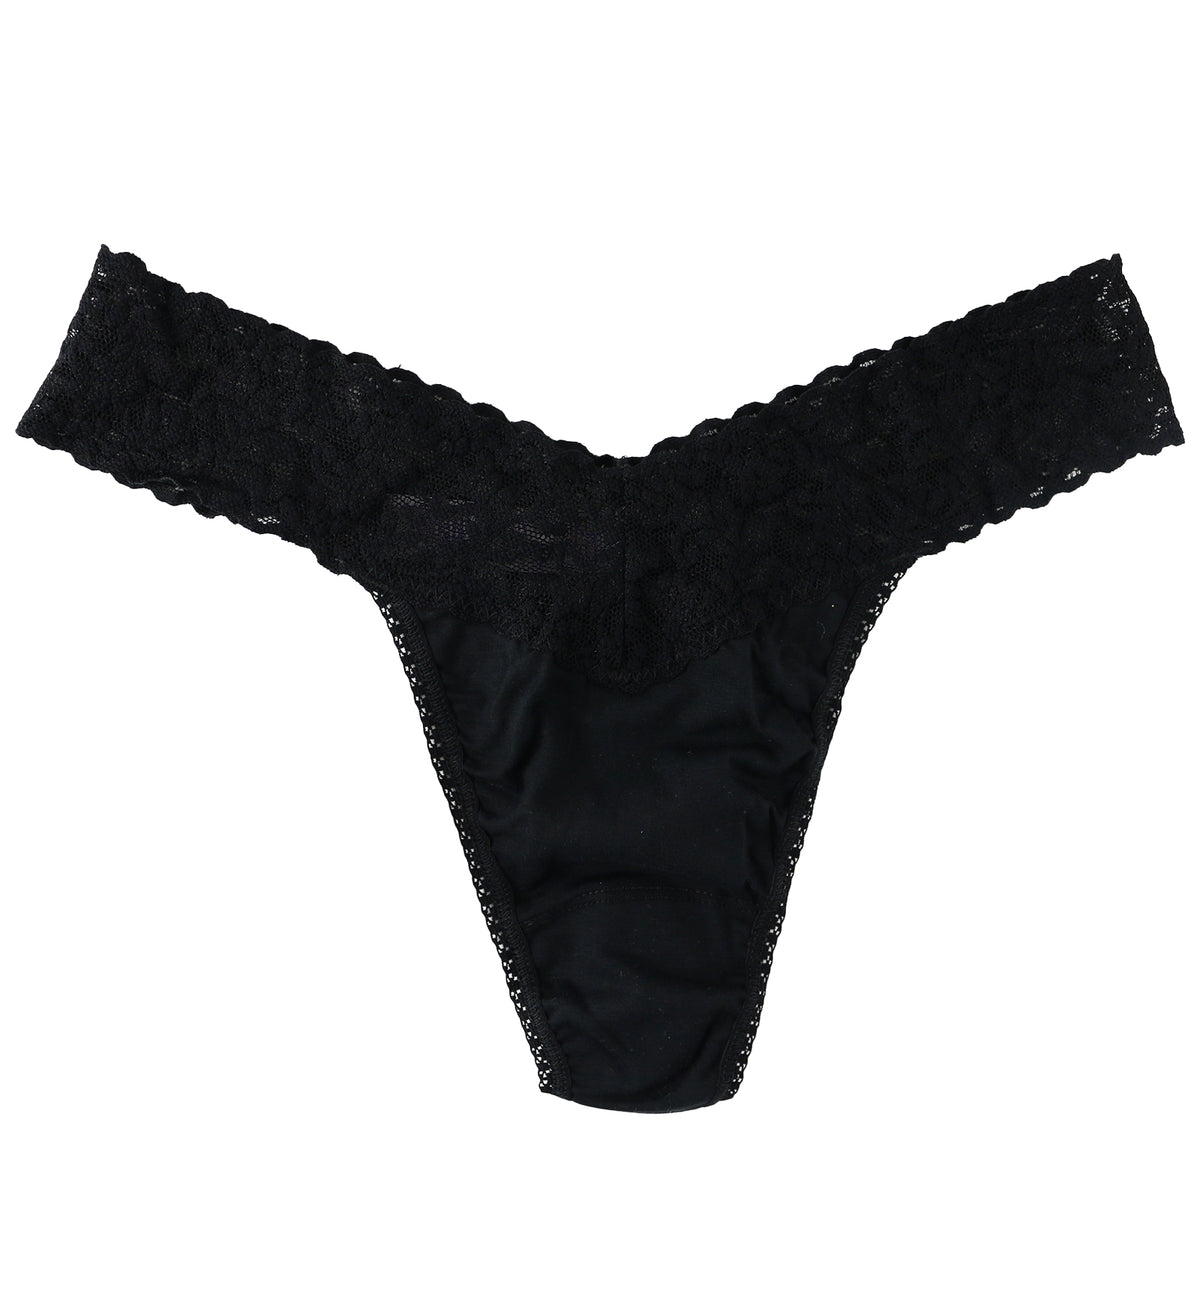 Hanky Panky Original Rise Organic Cotton Thong with Lace (891801),Black - Black,One Size